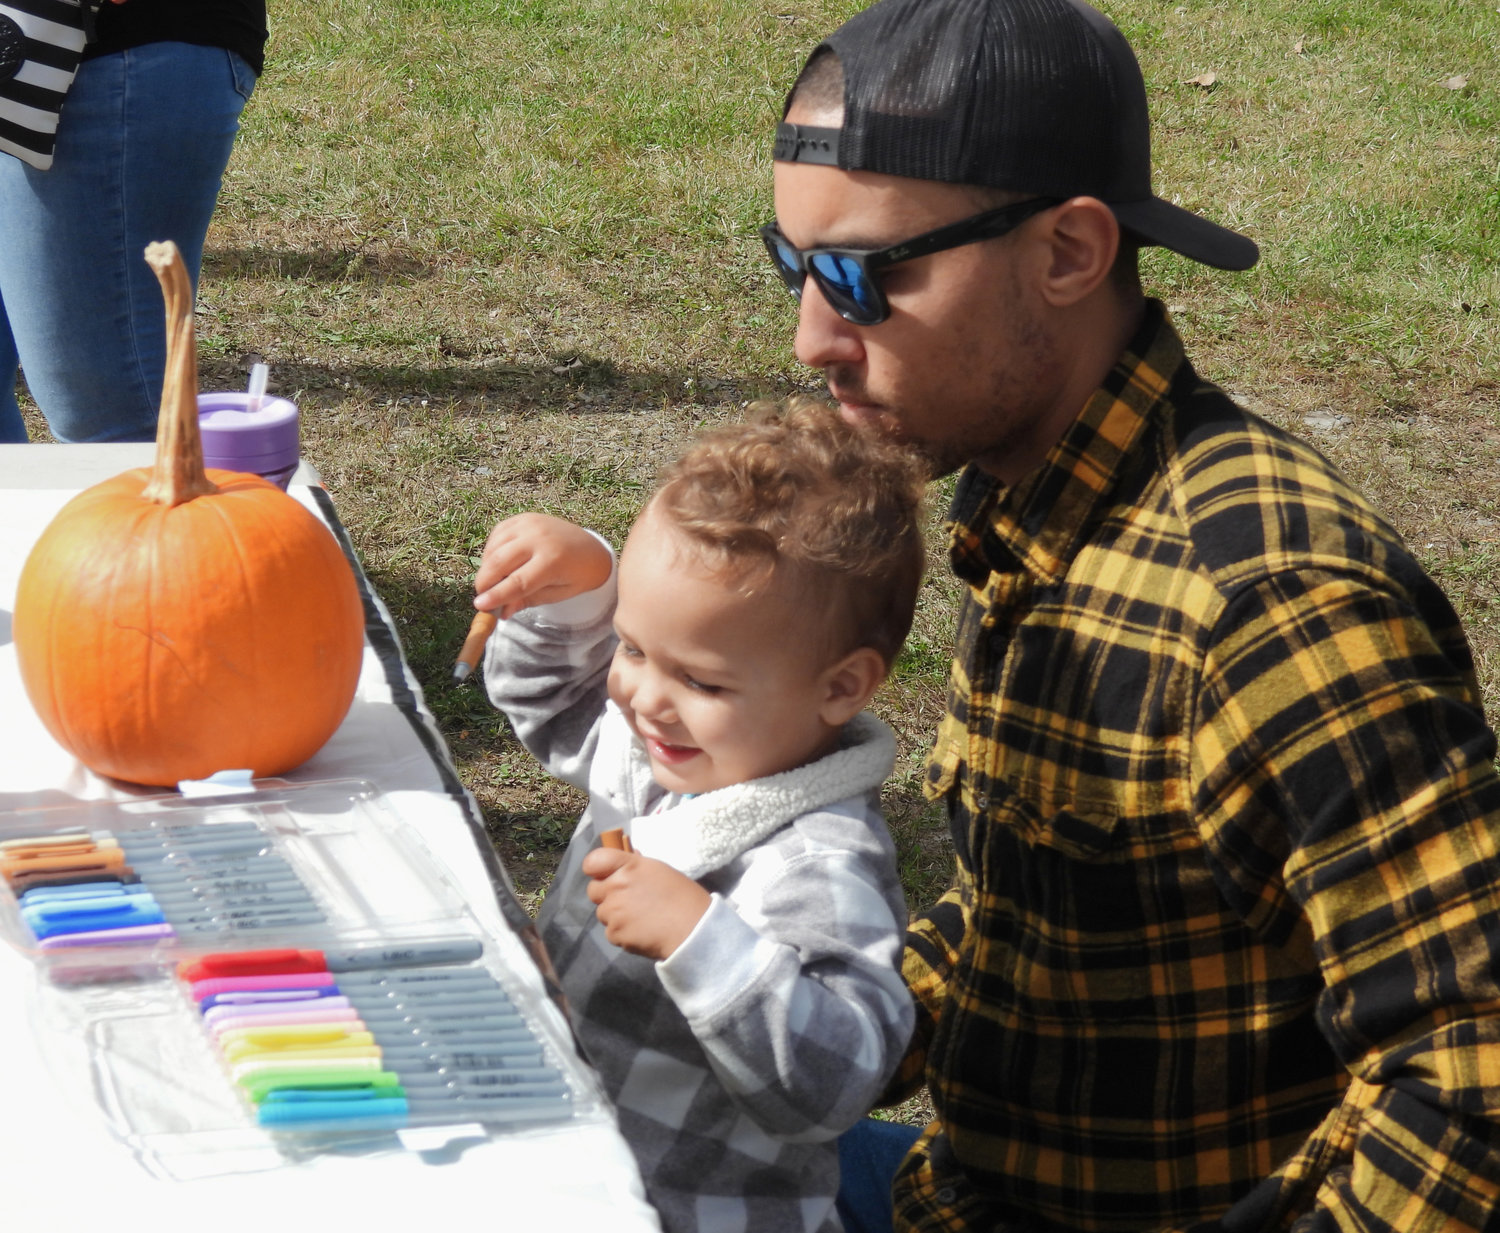 Rome resident Anthony Jones helps two-year-old Amelia Jones decorate her pumpkin at the Oneida Fall Fest on Saturday, Oct. 1 in the city of Oneida.